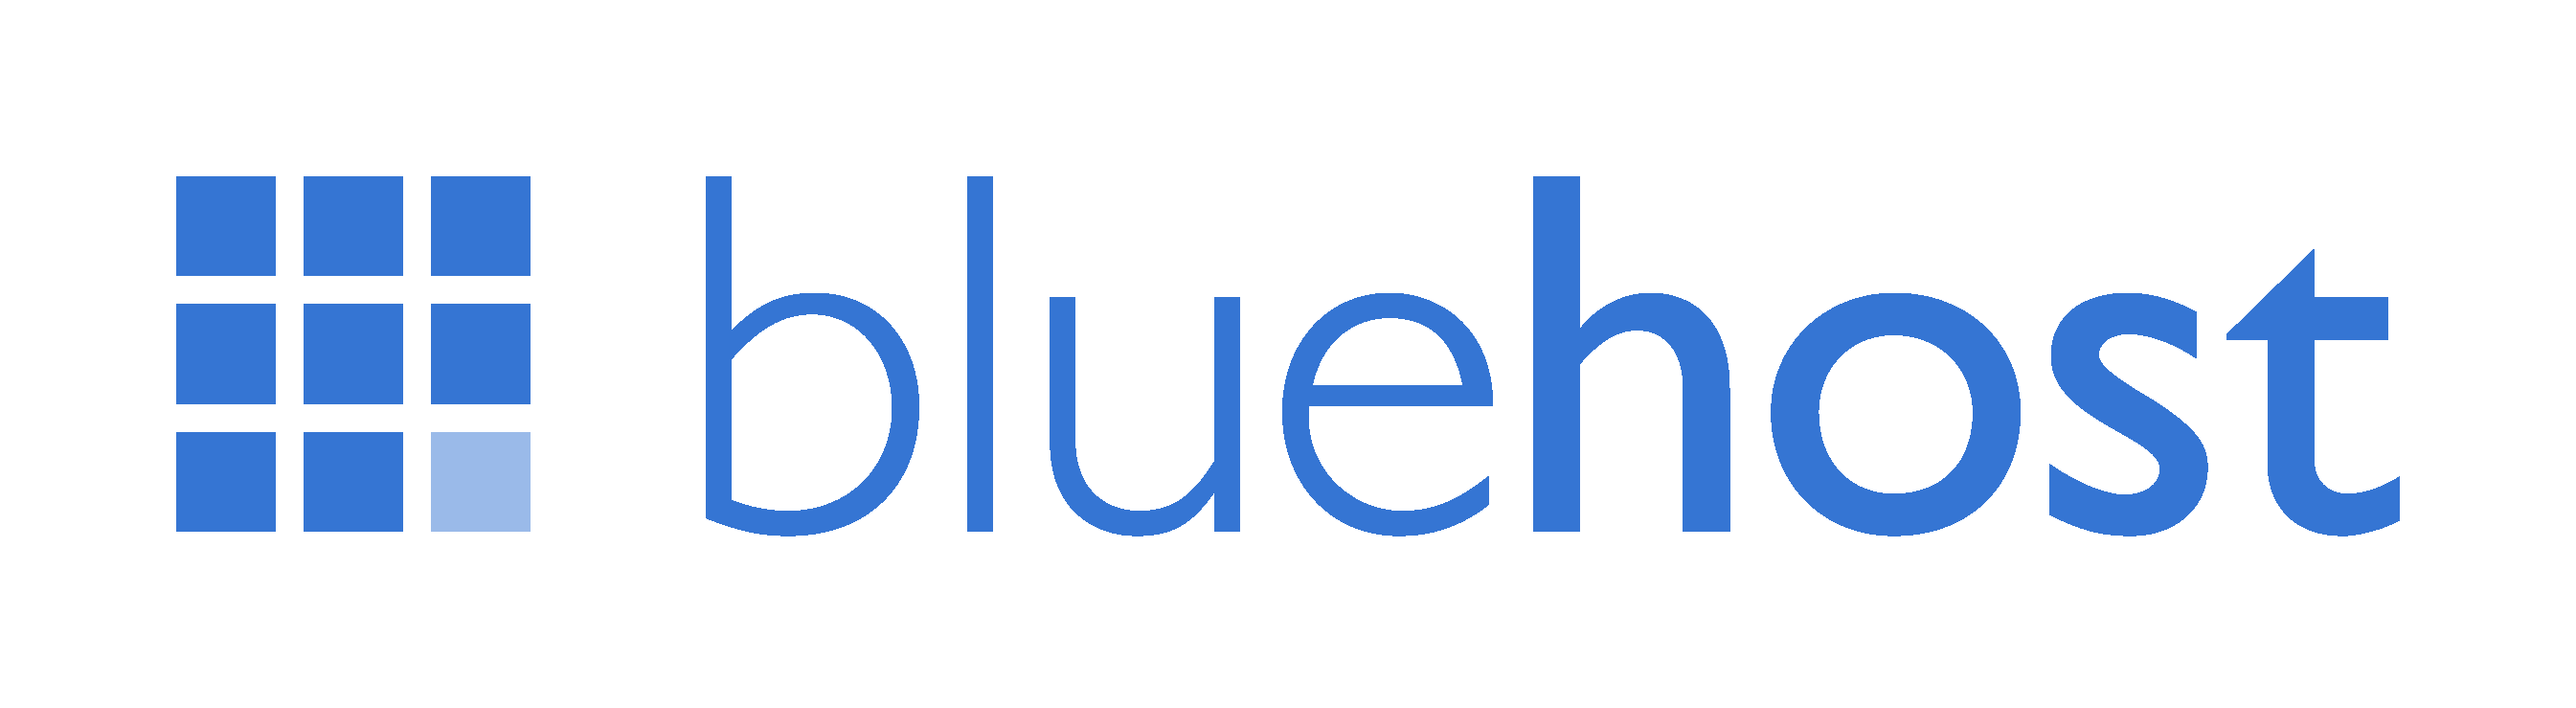 The Recent Bluehost Network Outage